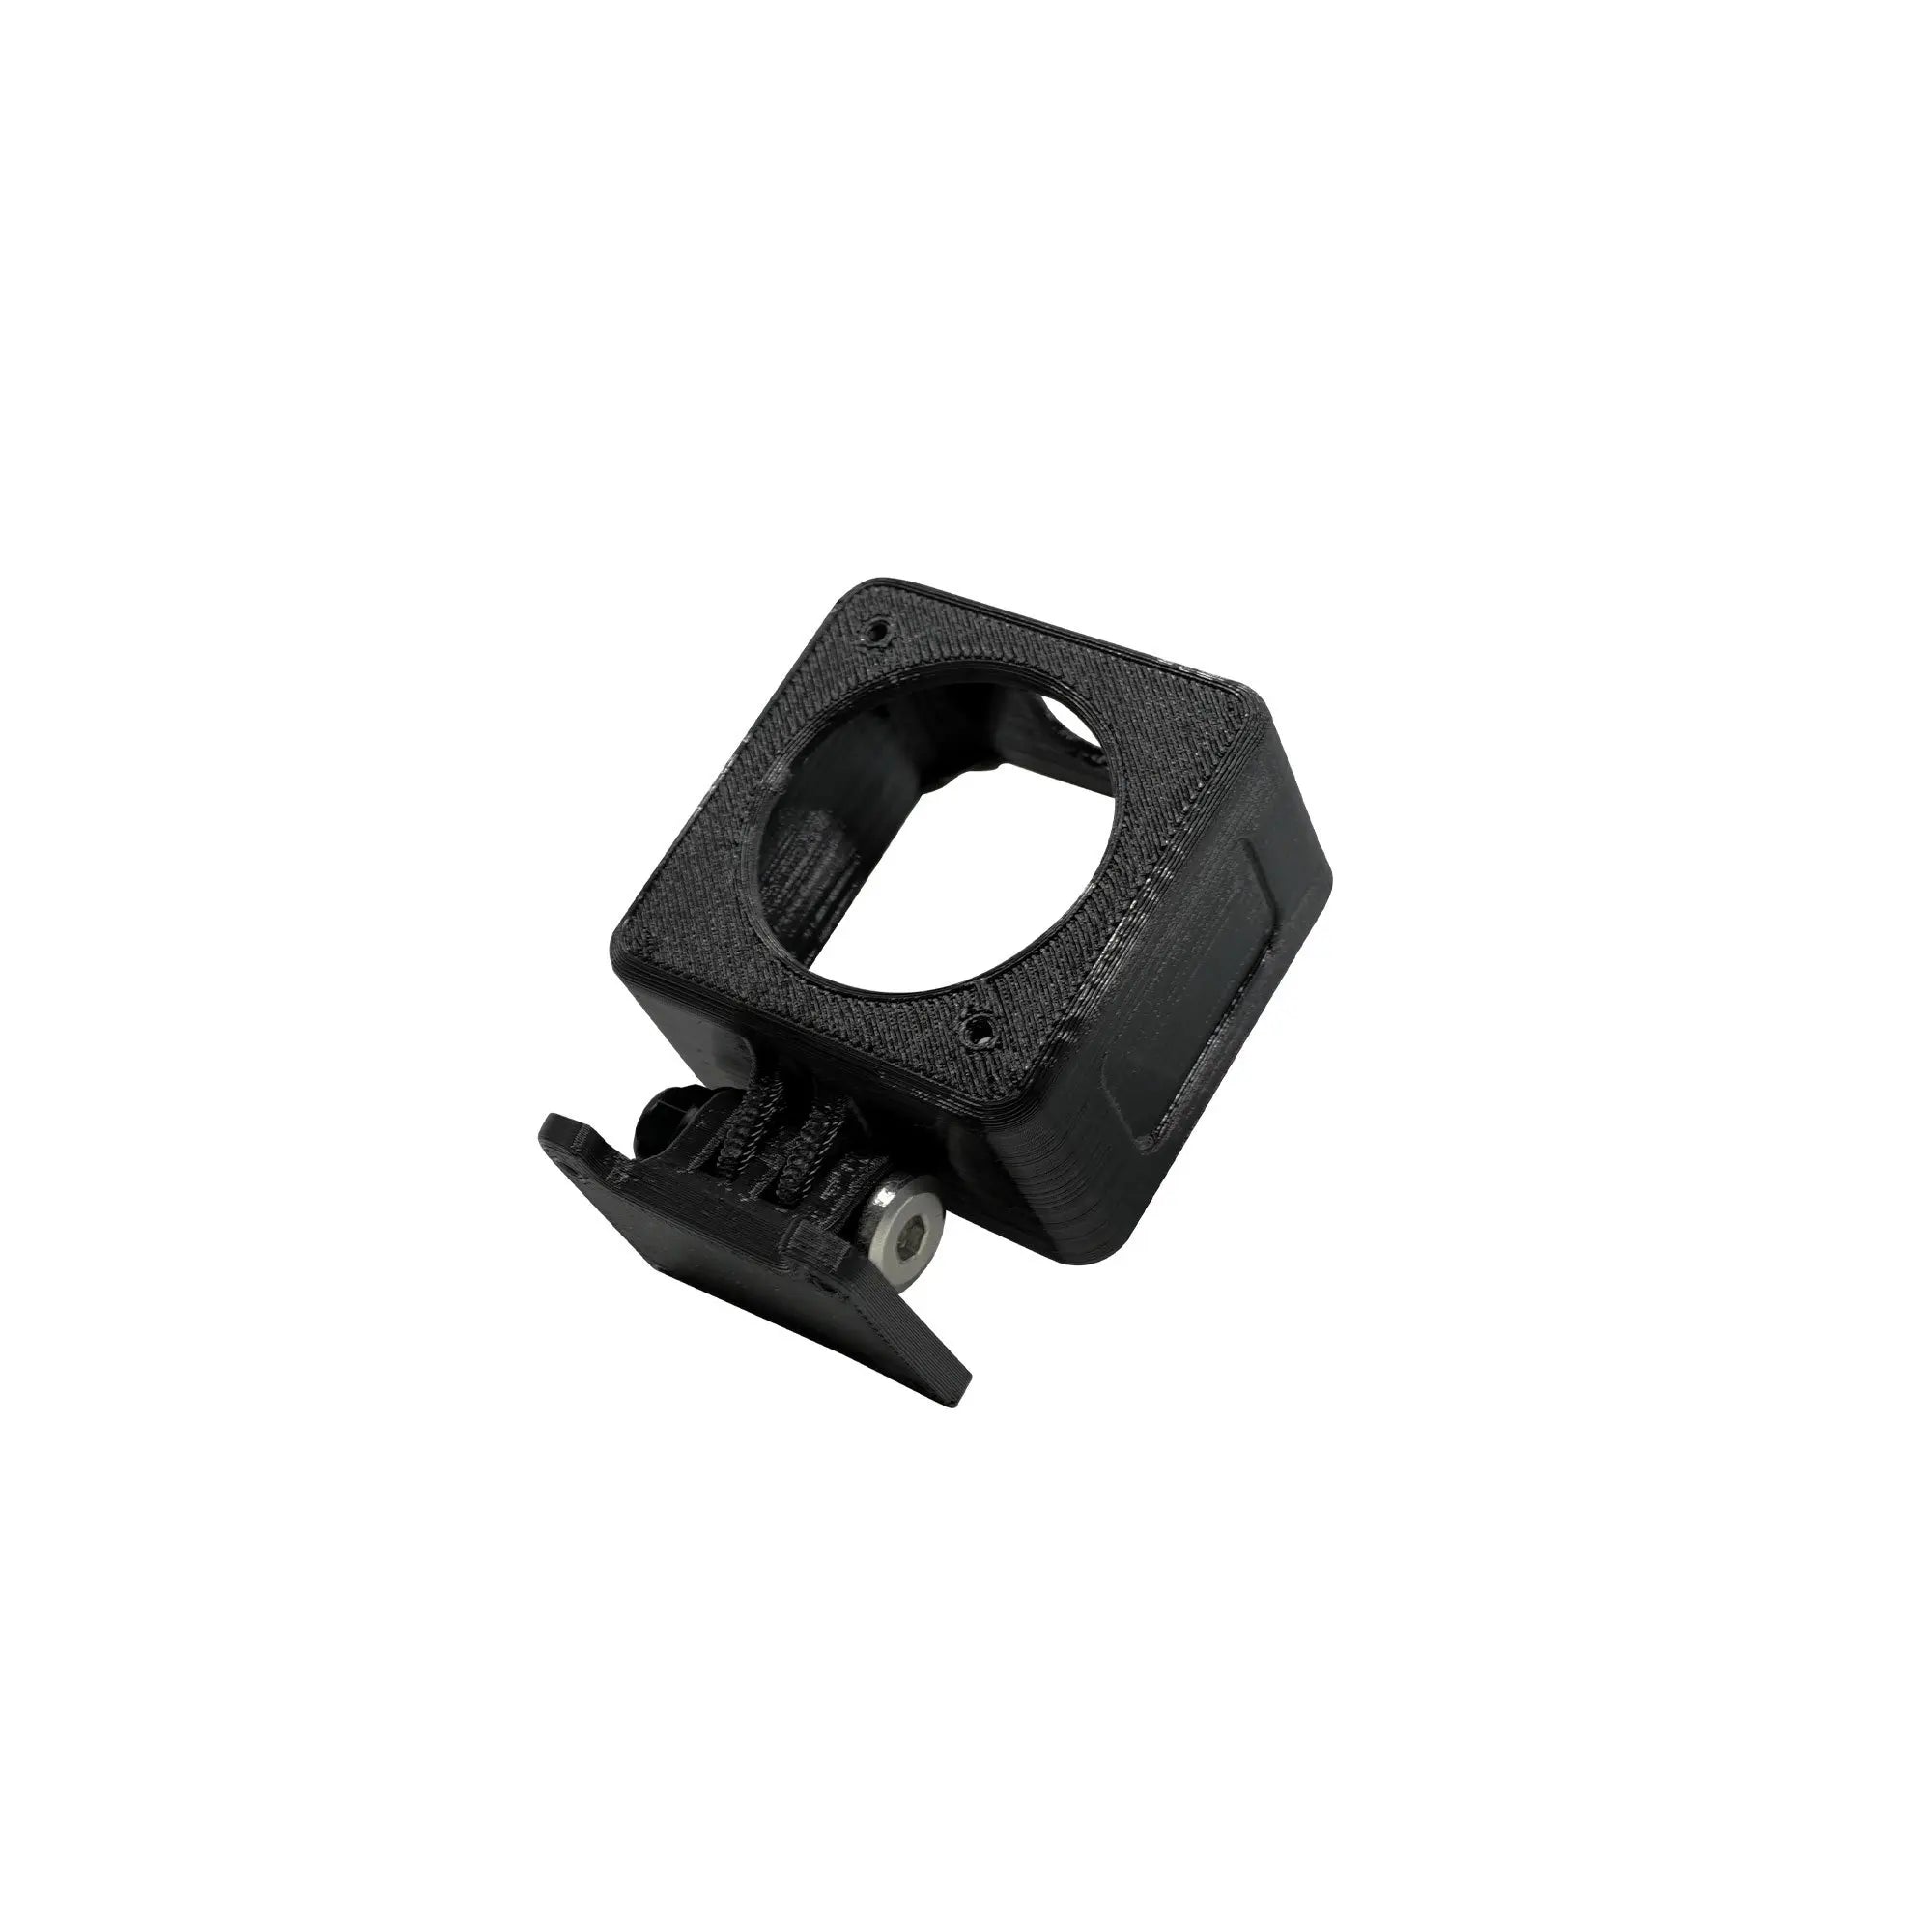 GEPRC CineLog35 Action2 Camera Mount SPECIFICATIONS Brand Name 